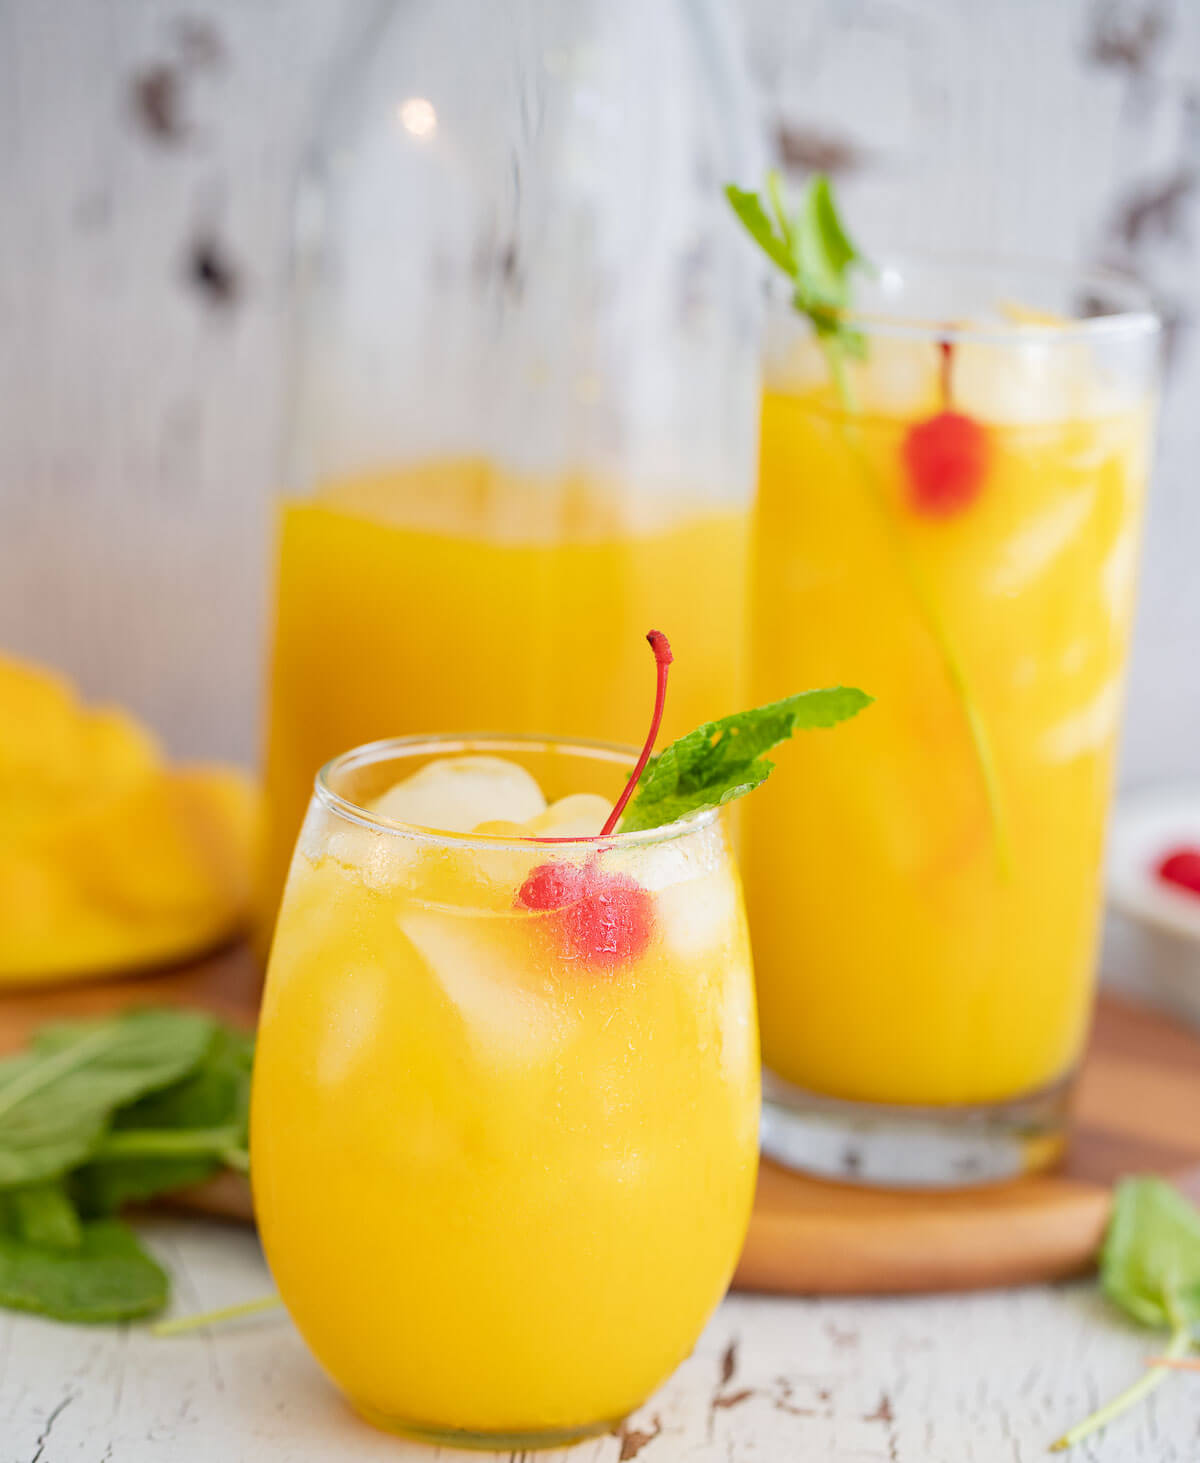 Glasses and a jug filled with fresh mango juice with a cherry and mint as garnish